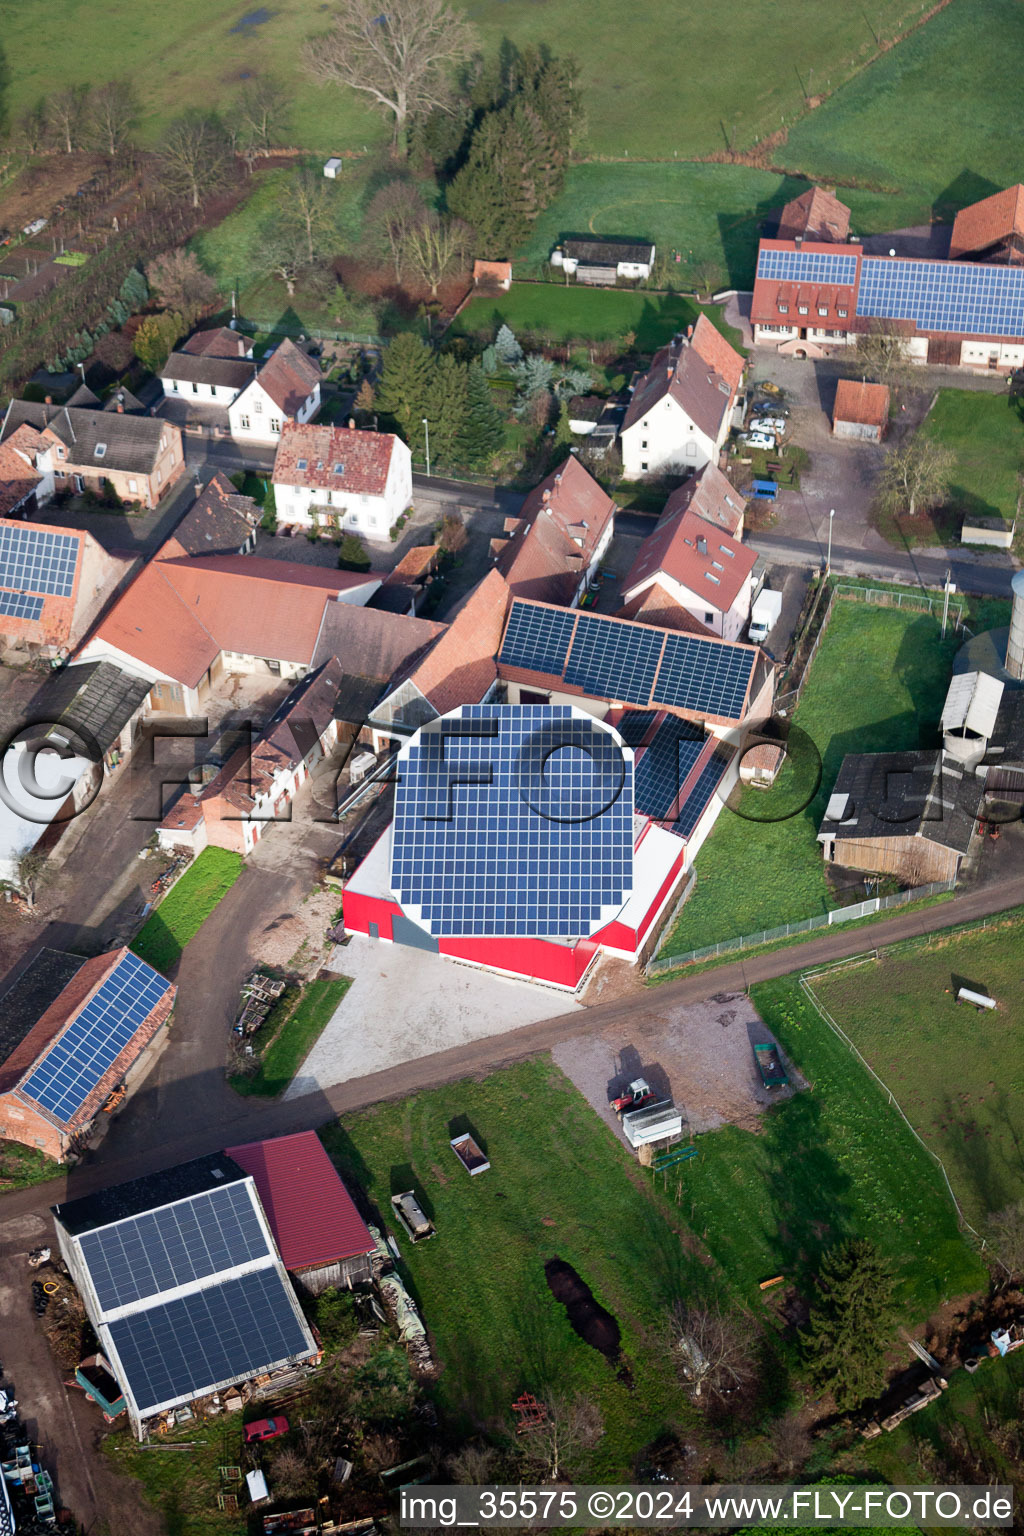 Aerial photograpy of Panel rows of photovoltaic turnable roof of a stable in the district Deutschhof in Kapellen-Drusweiler in the state Rhineland-Palatinate